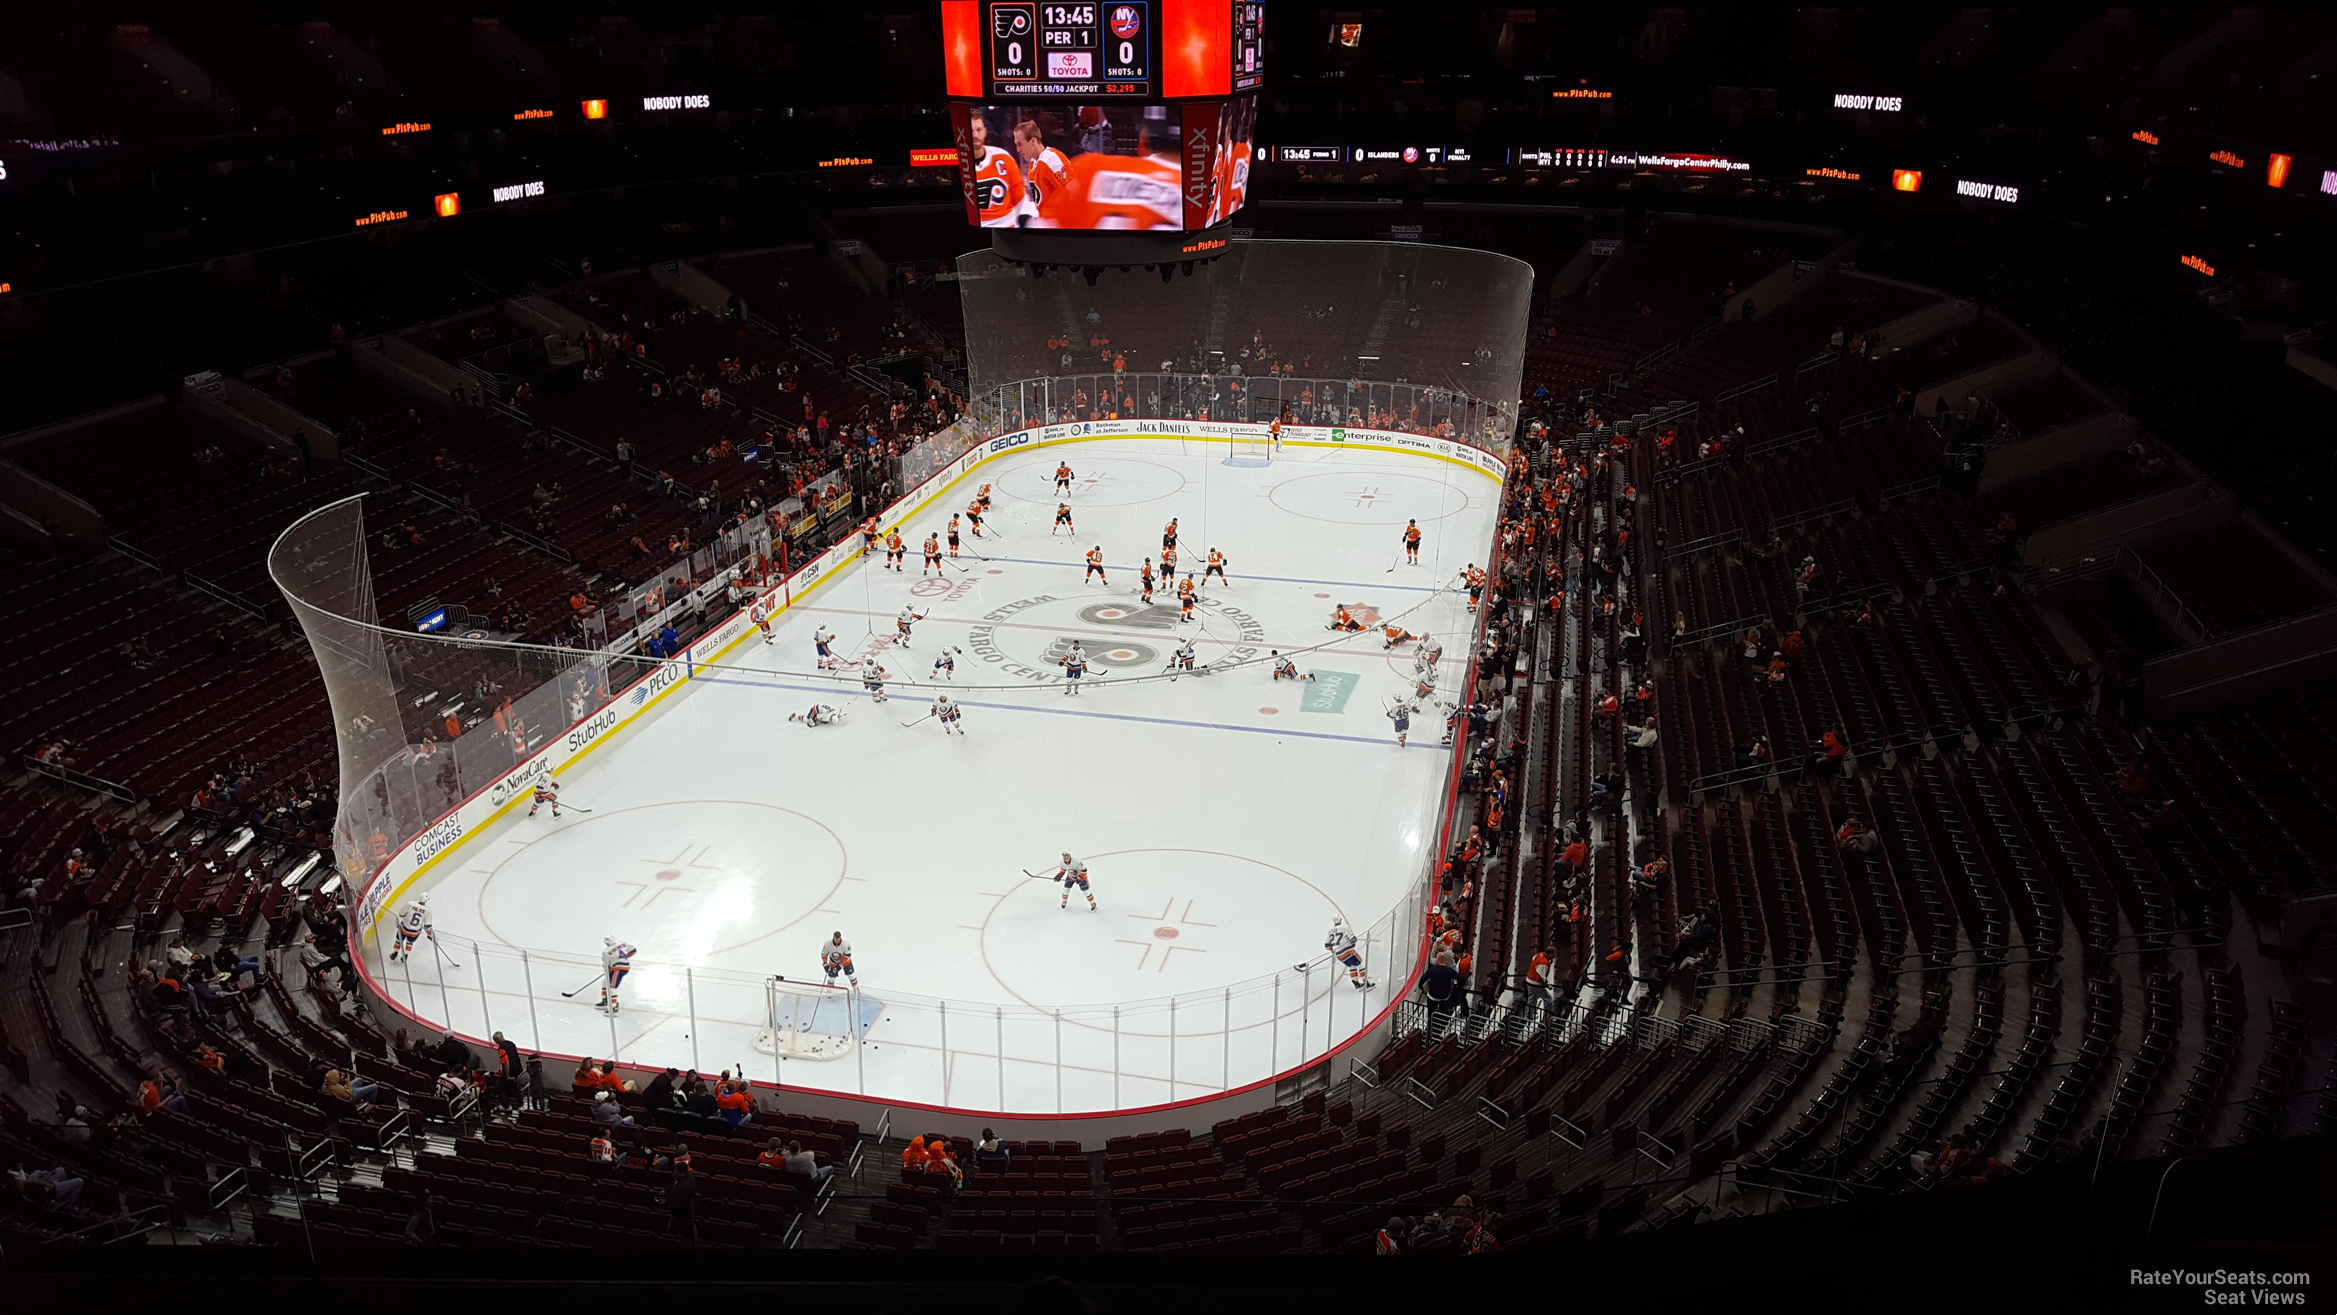 section 208, row 8 seat view  for hockey - wells fargo center